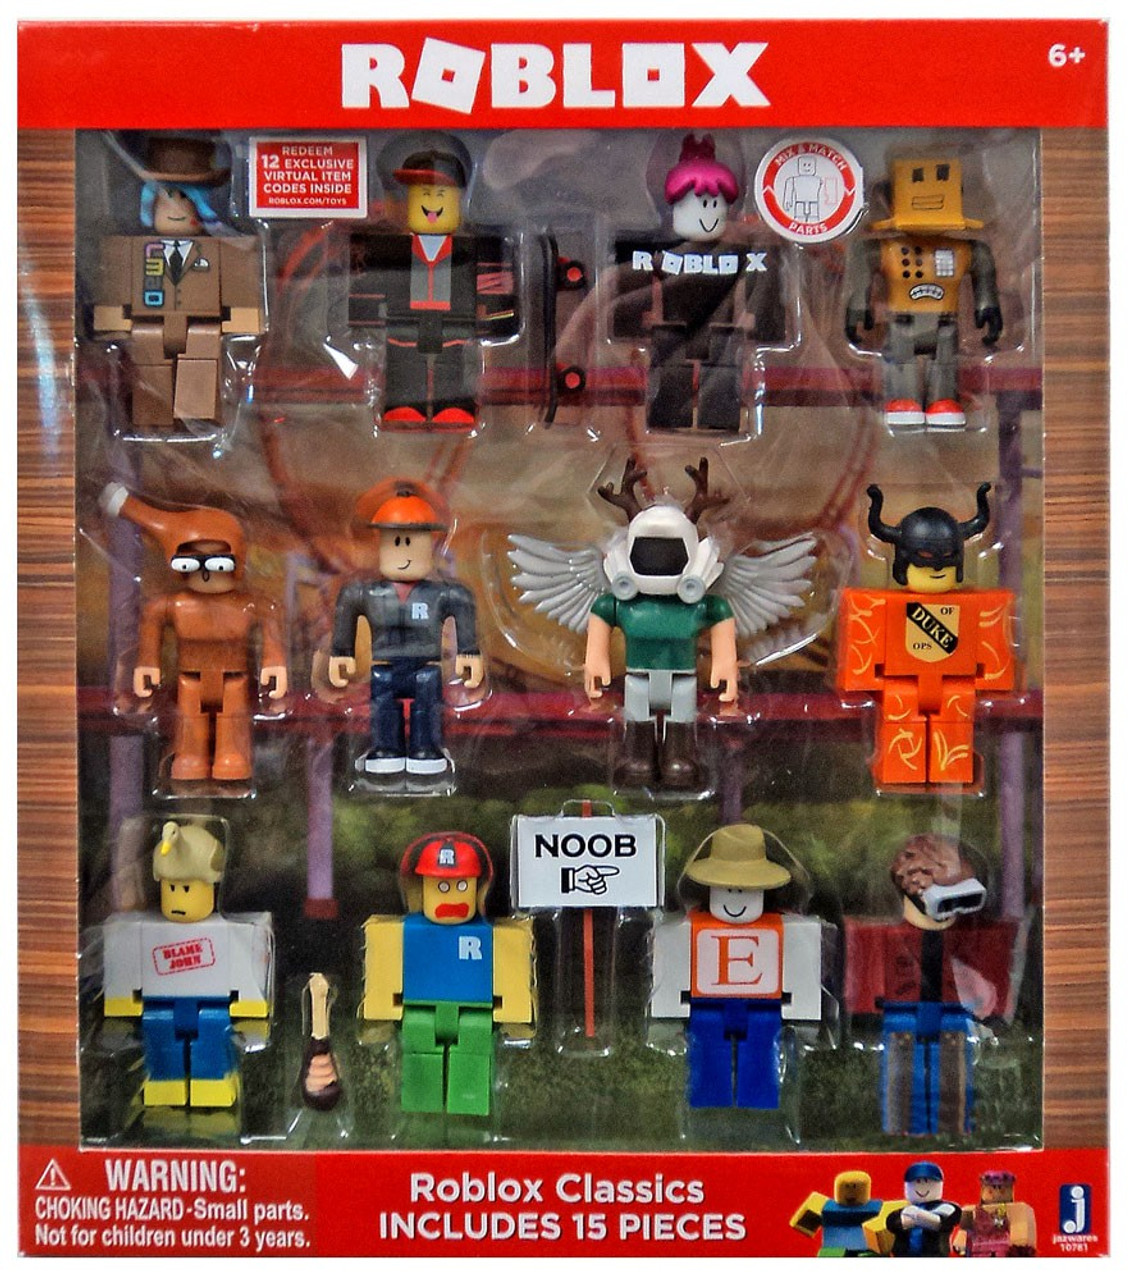 Roblox Series 1 Roblox Classics Exclusive 3 Action Figure 12 Pack Includes 12 Online Item Codes Jazwares Toywiz - mystery boxes roblox classics 12 figure pack